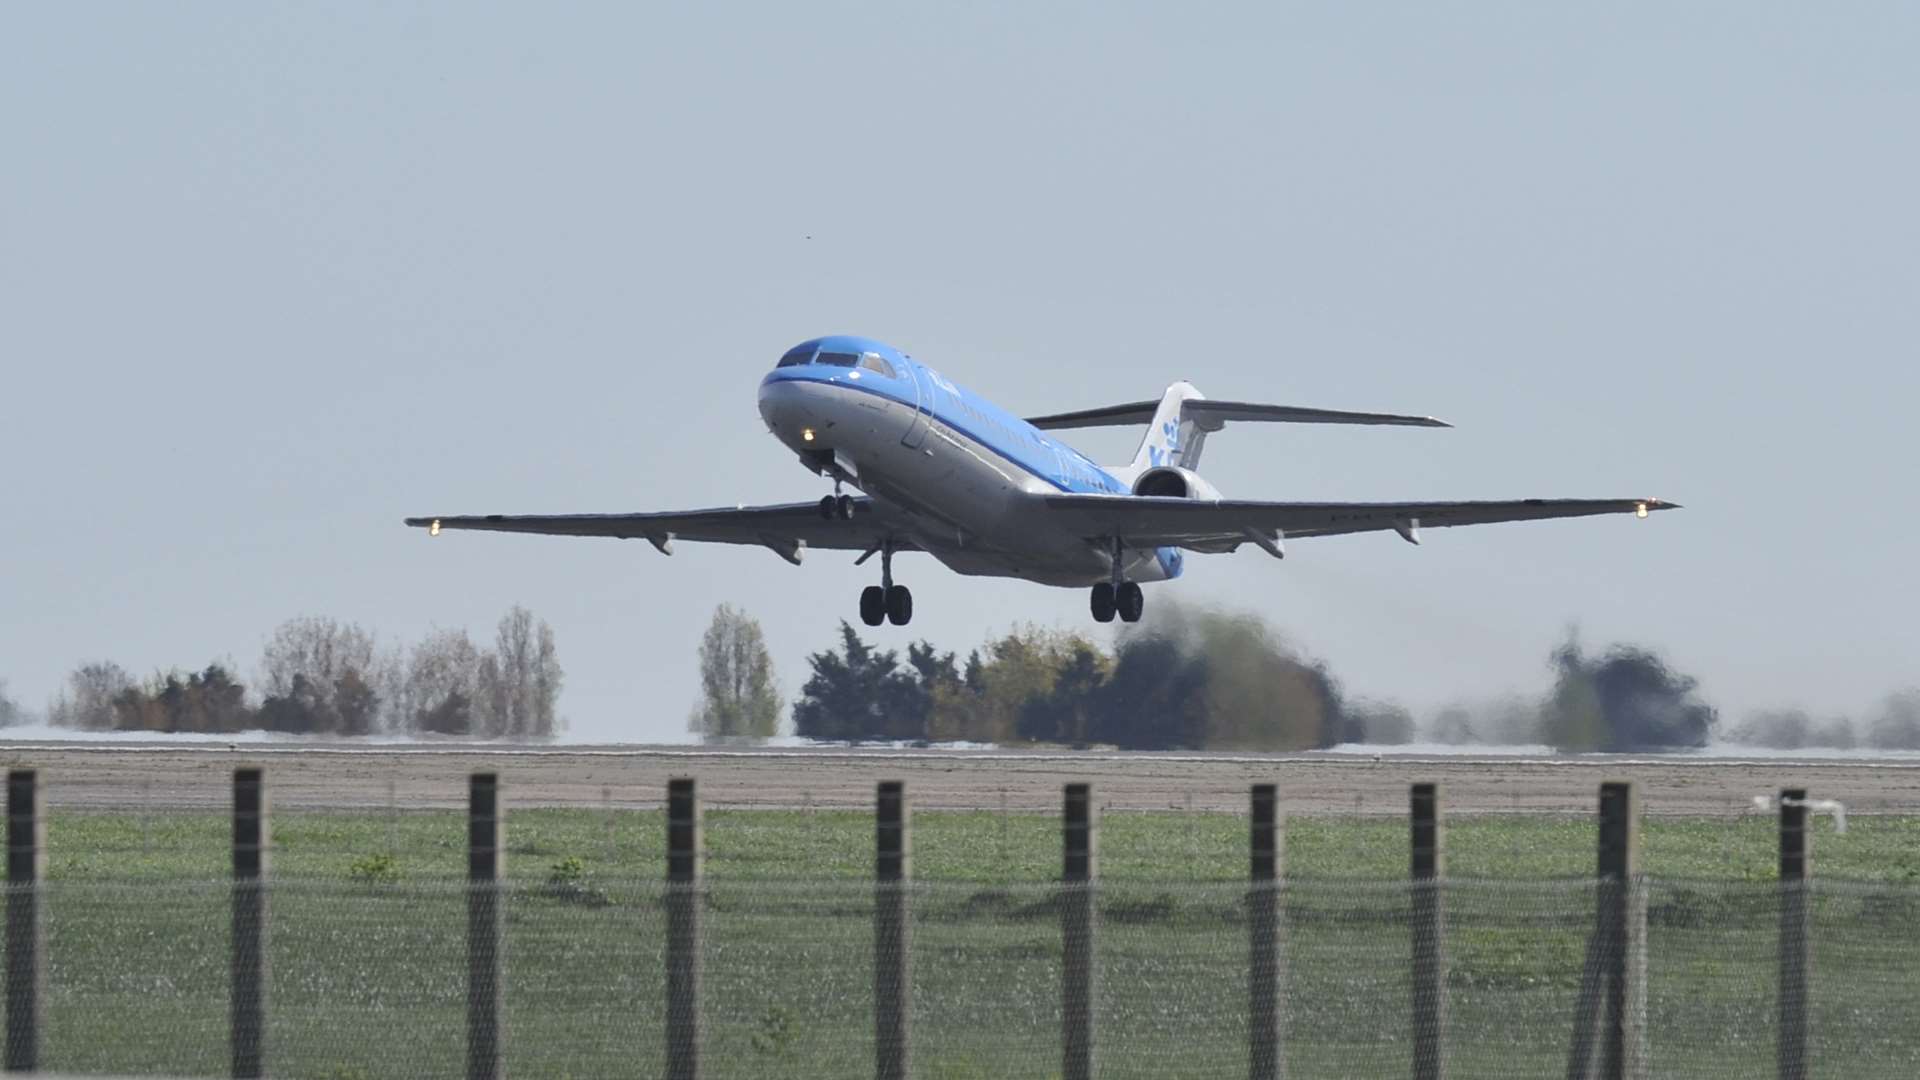 The last KLM flight from Manston in 2014. Picture: Tony Flashman